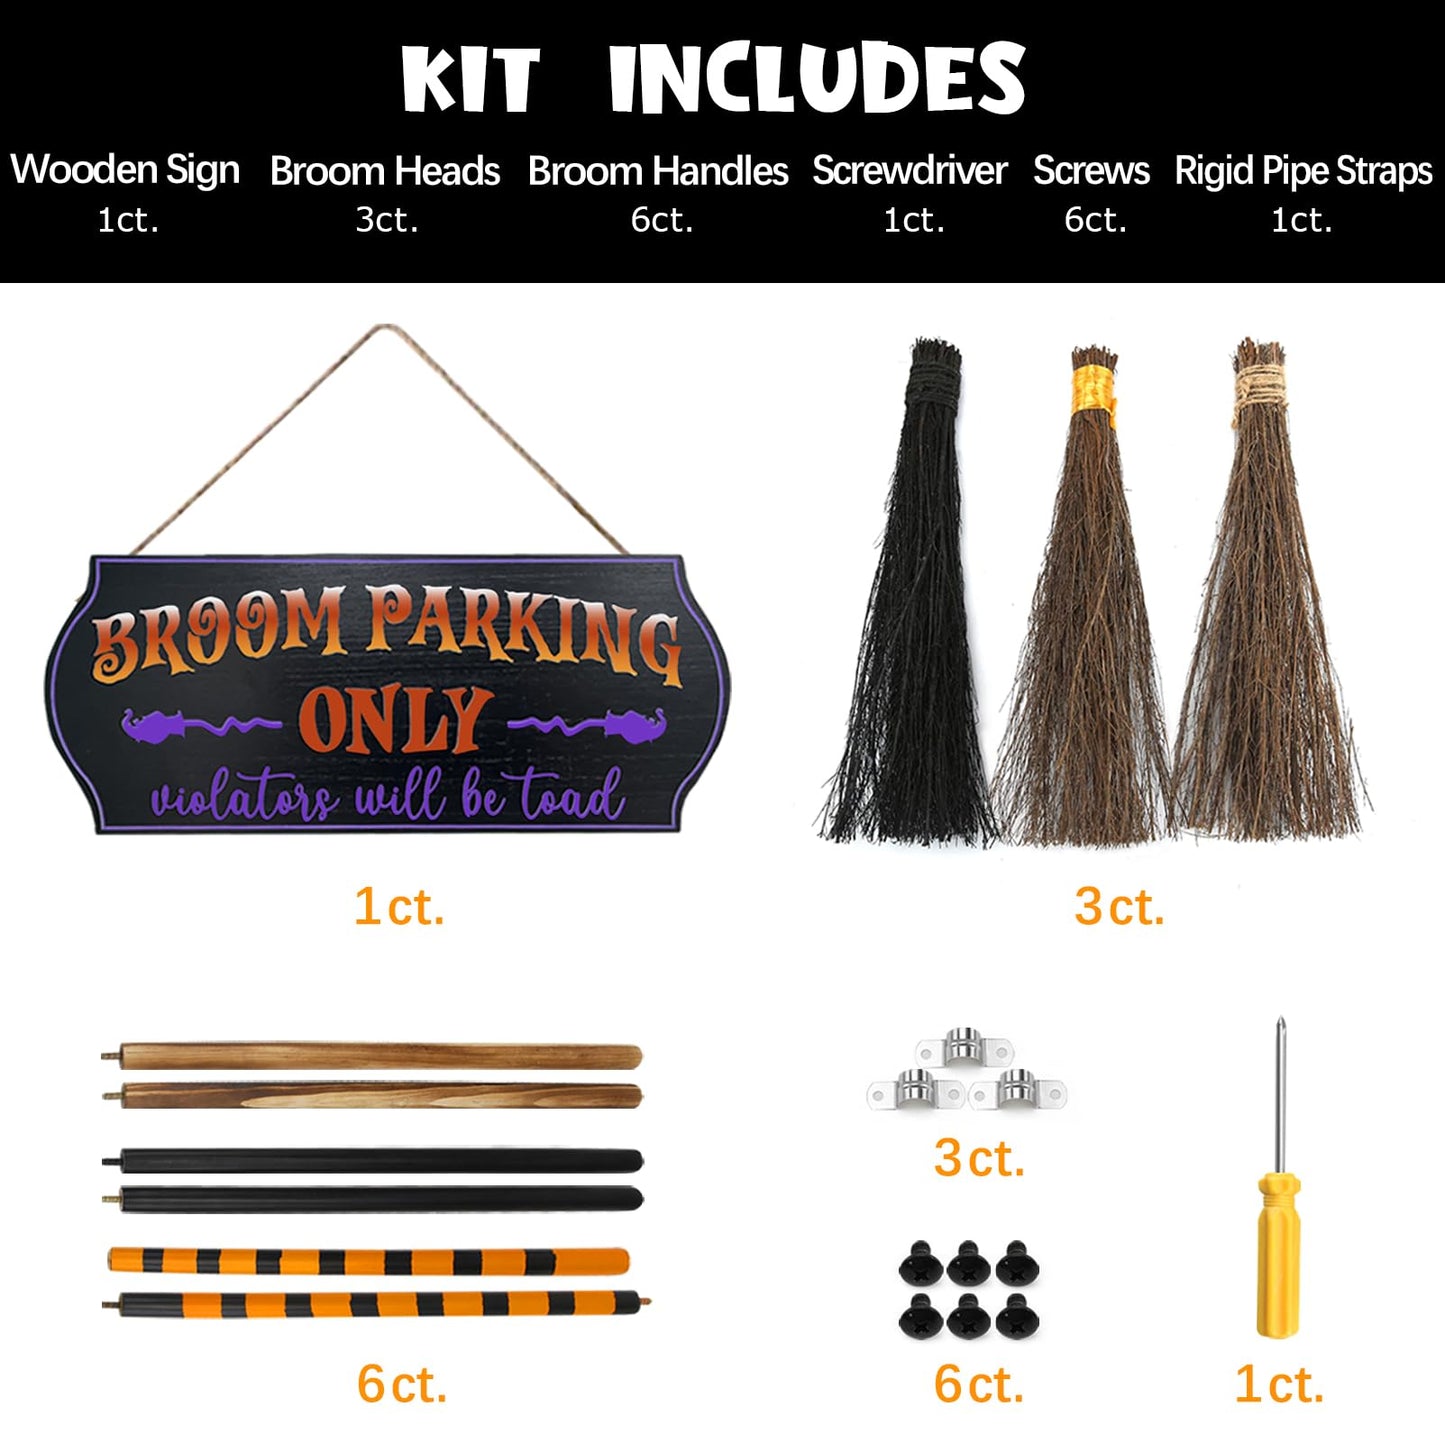 Kit includes